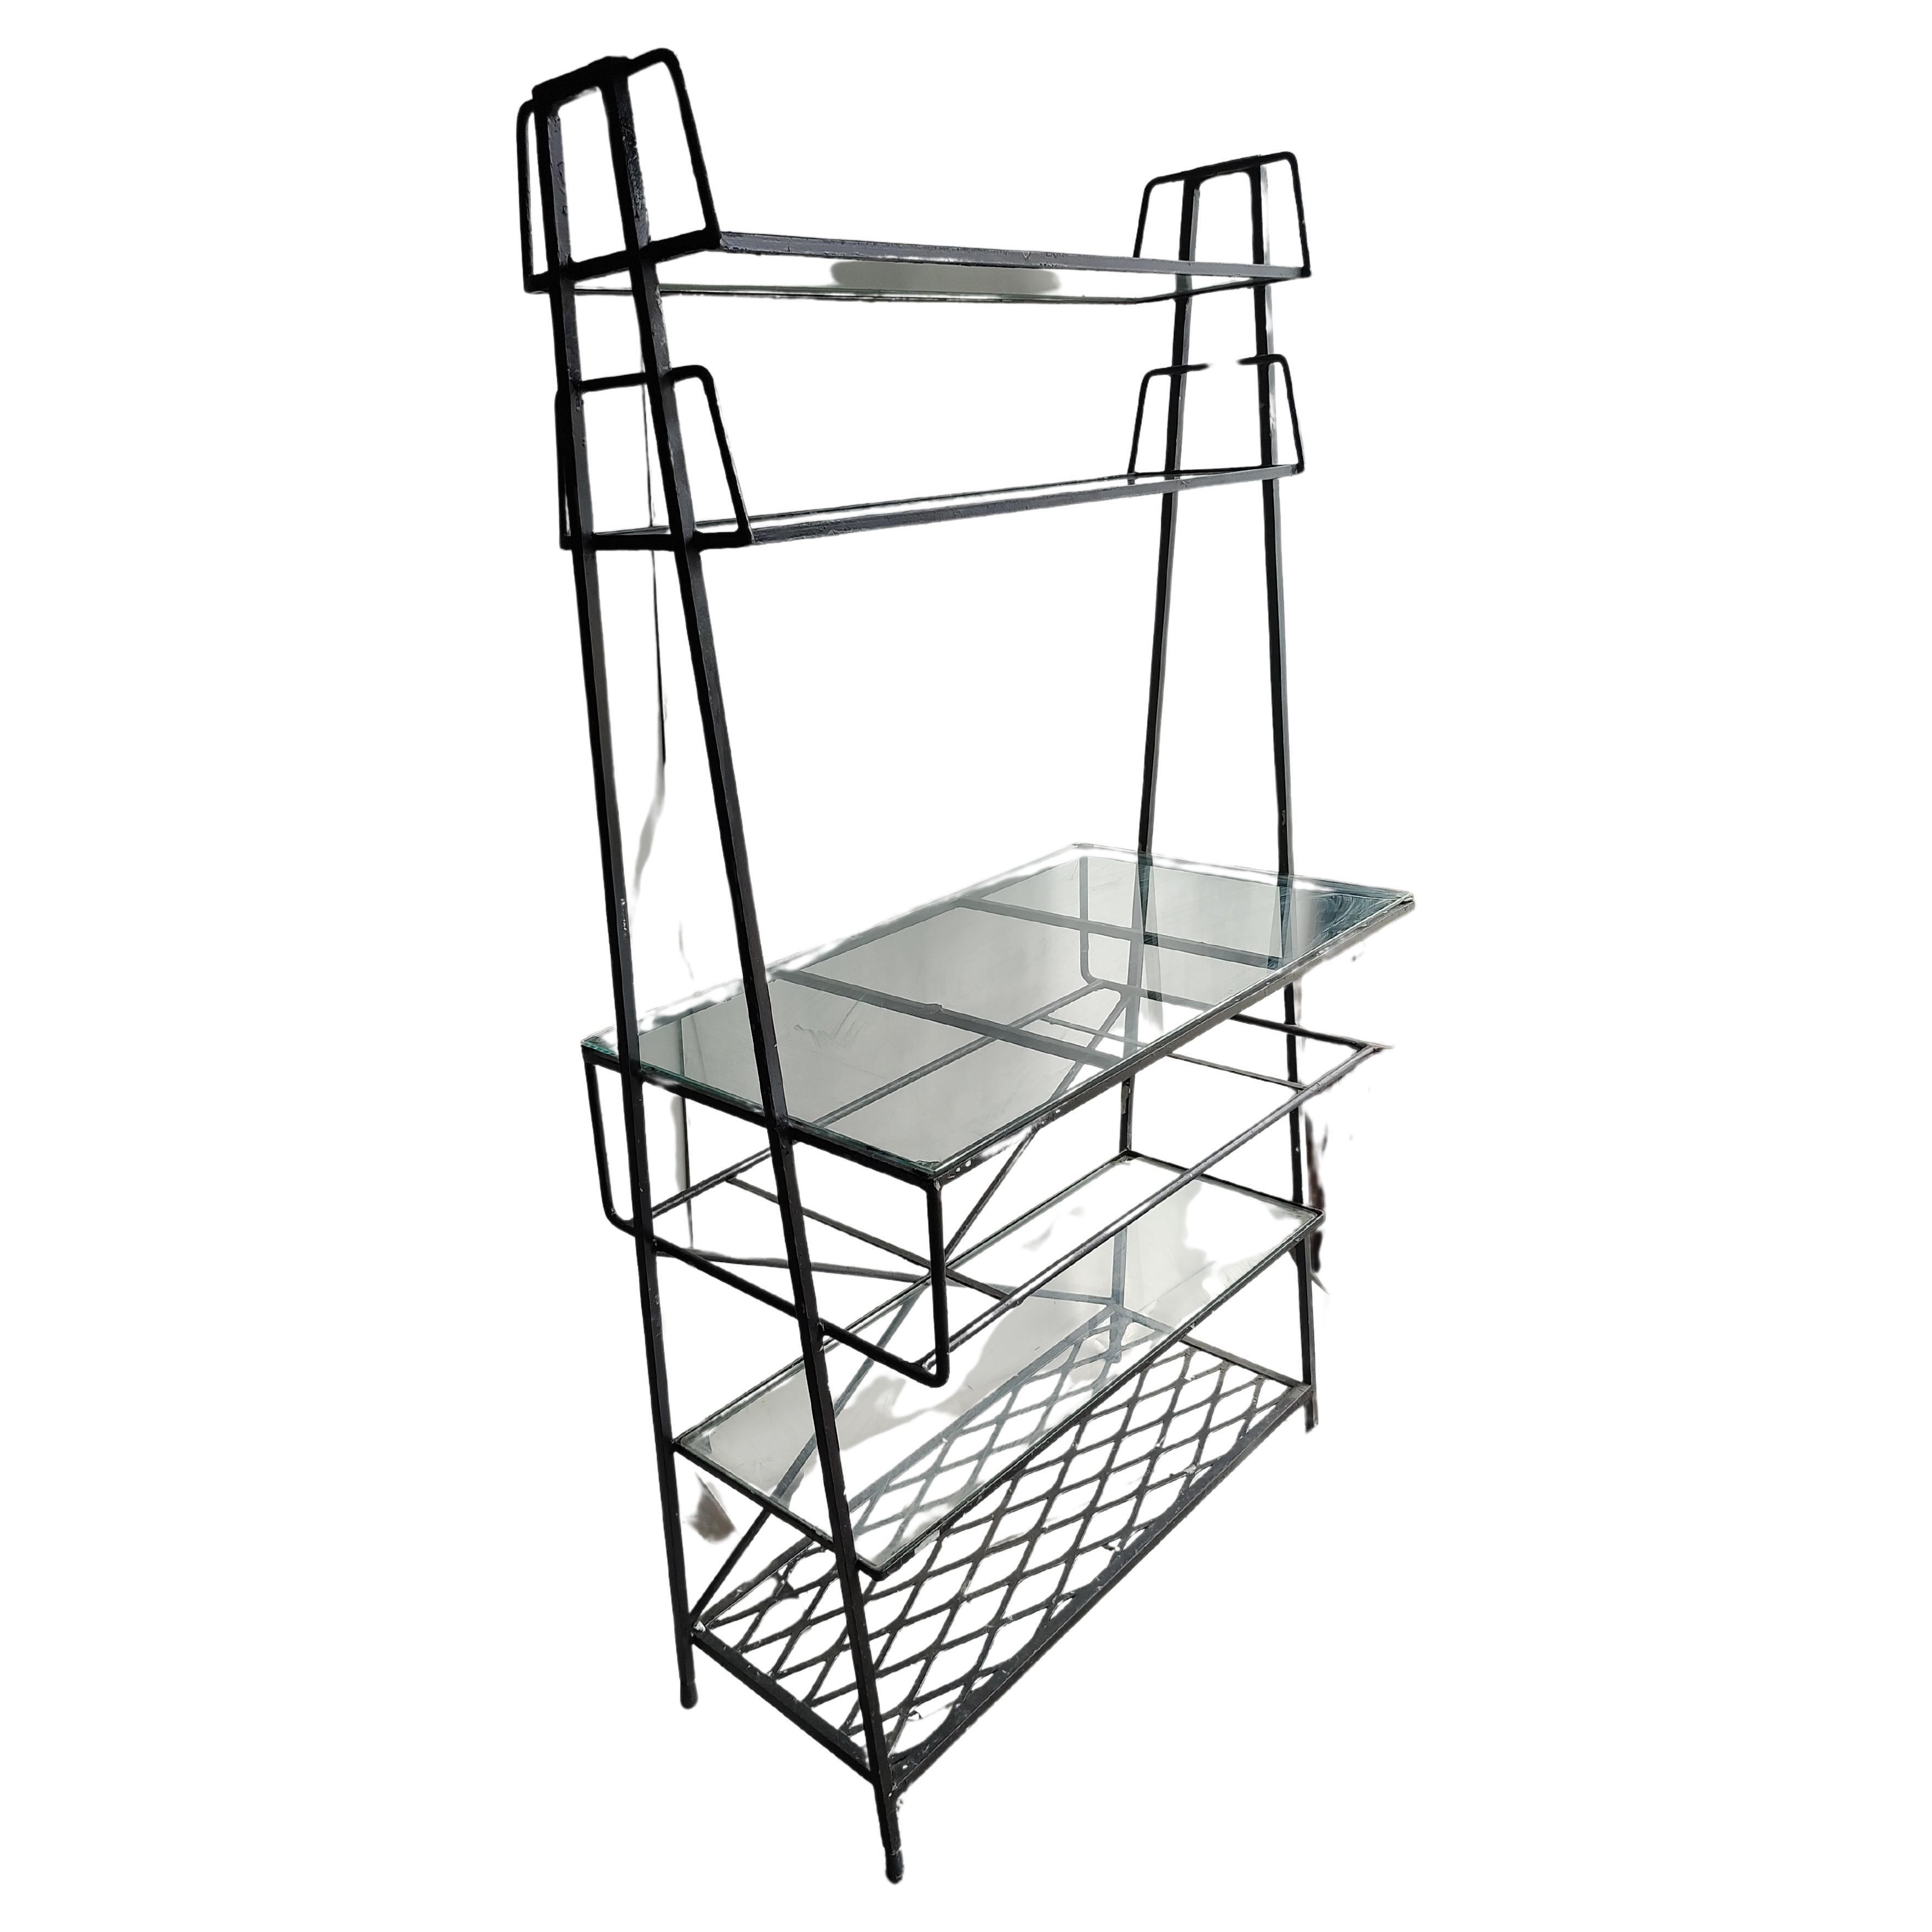 Hand-Crafted Mid-Century Modern Iron & Glass Indoor Outdoor Patio Etagere by John Salterini  For Sale